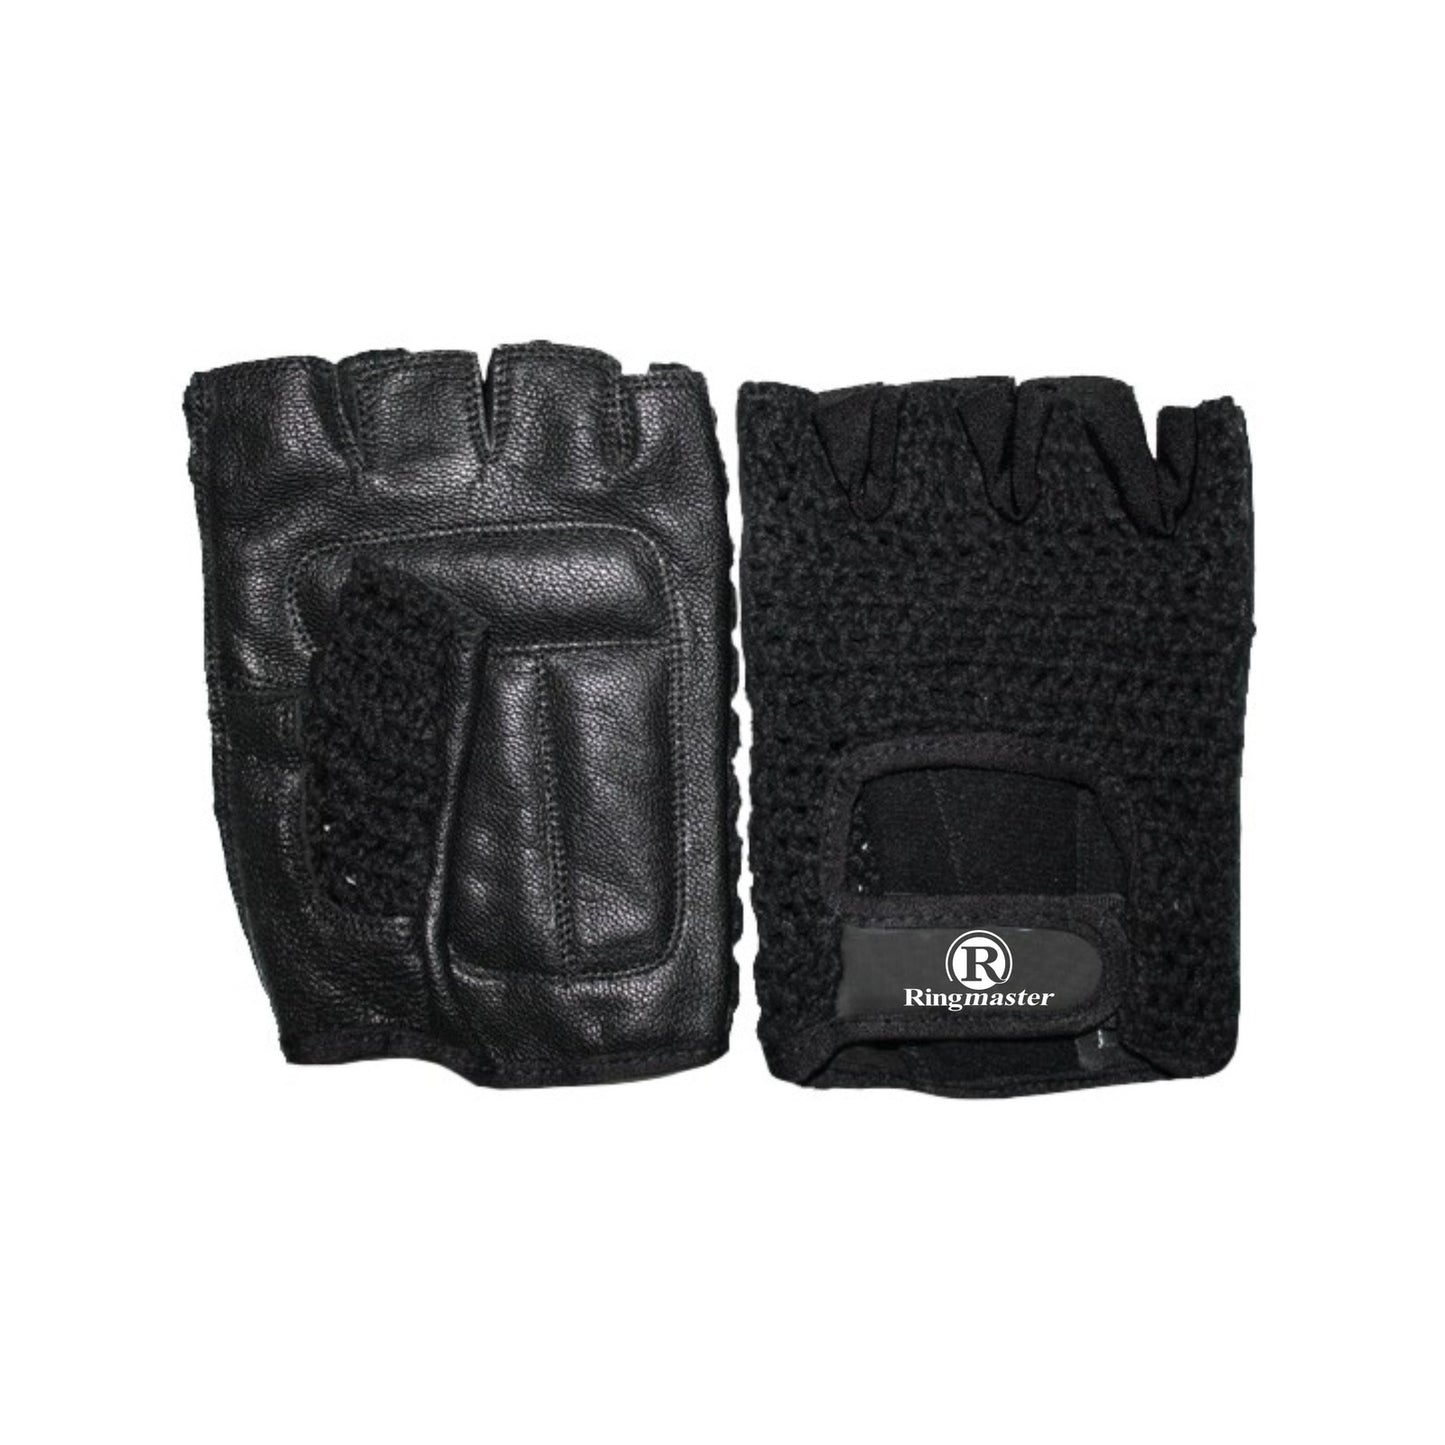 Ringmaster Ko Weight Gloves - Pair - S / M / L / XL Sizes Available